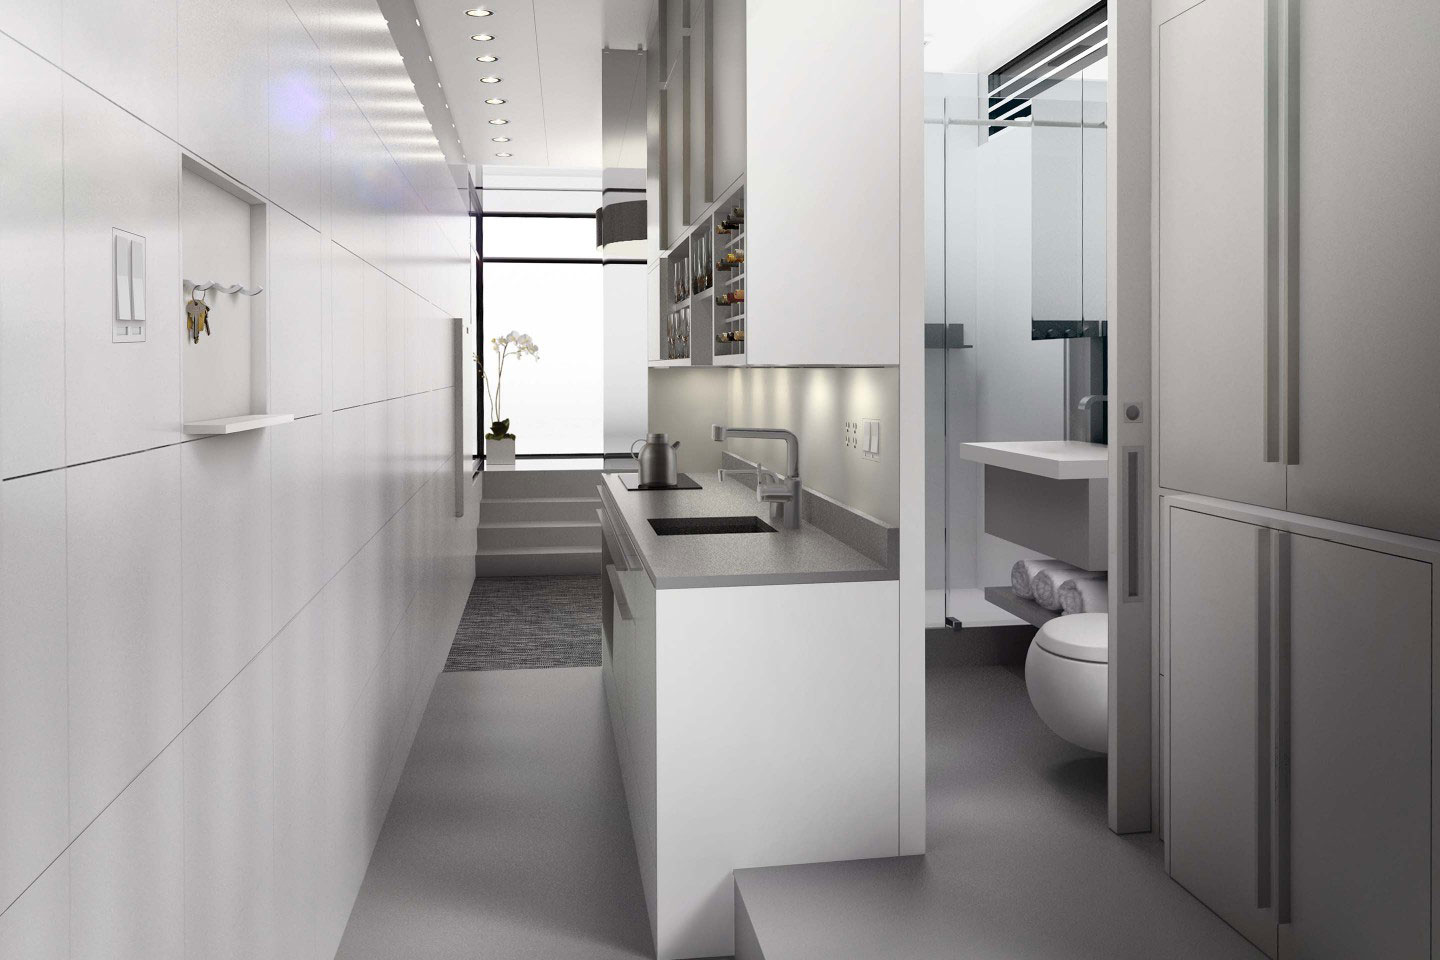 kasita is a tiny apartment that moves between cities interior kitchen bath laundry 1440x960